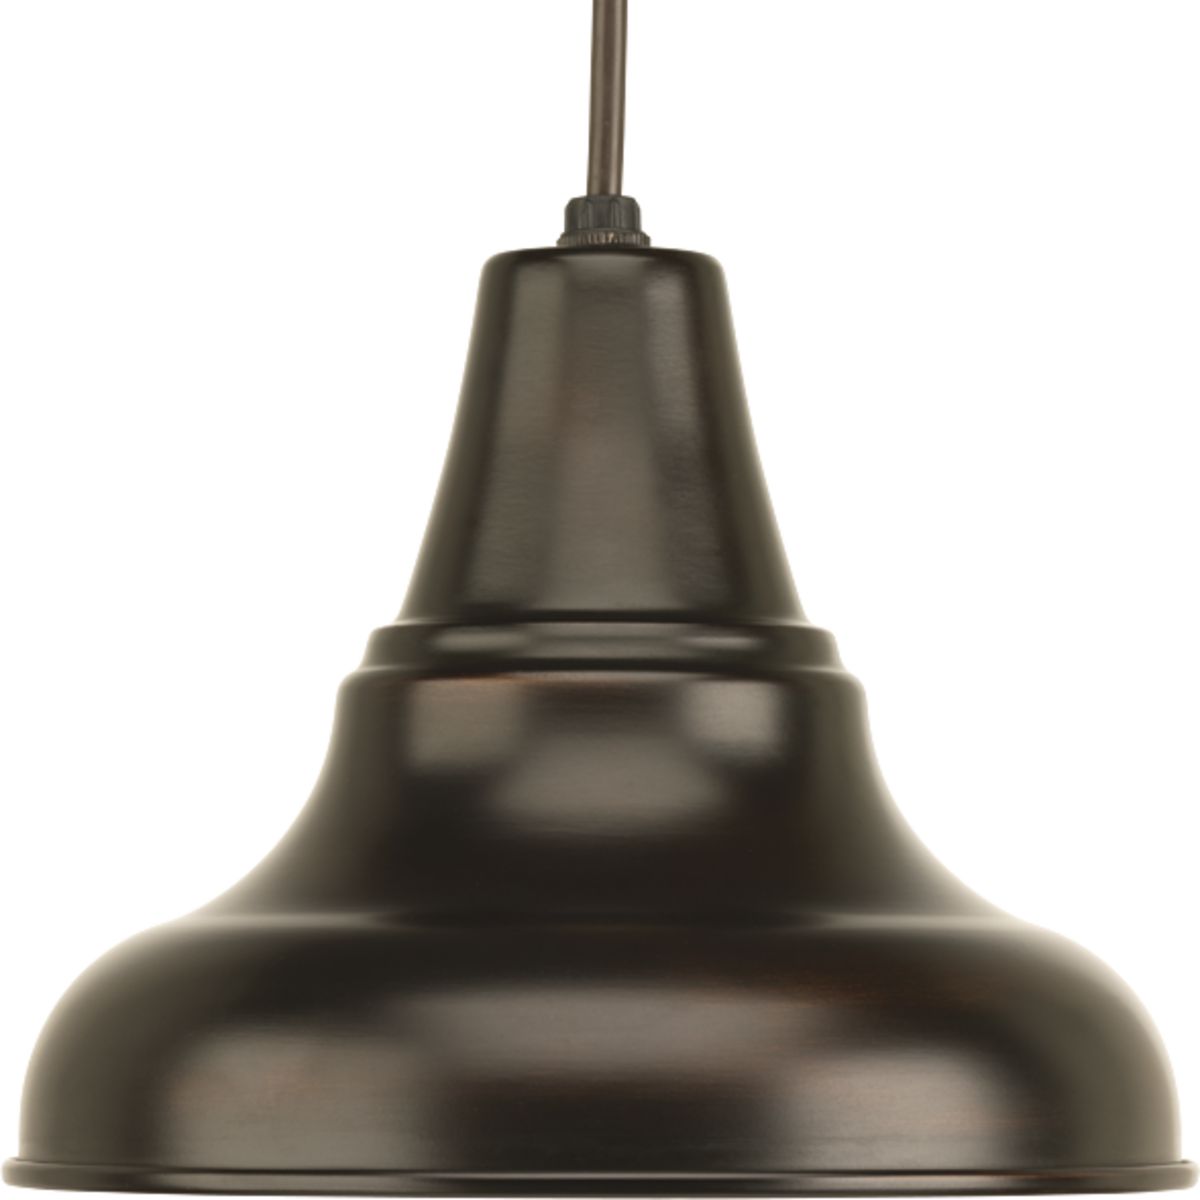 The one-light medium size cord hung pendant/outdoor hanging lantern from the District Collection features metal shade that offers an industrial-inspired design. The versatile vintage form can be used in indoor and outdoor applications. Antique Bronze finish.